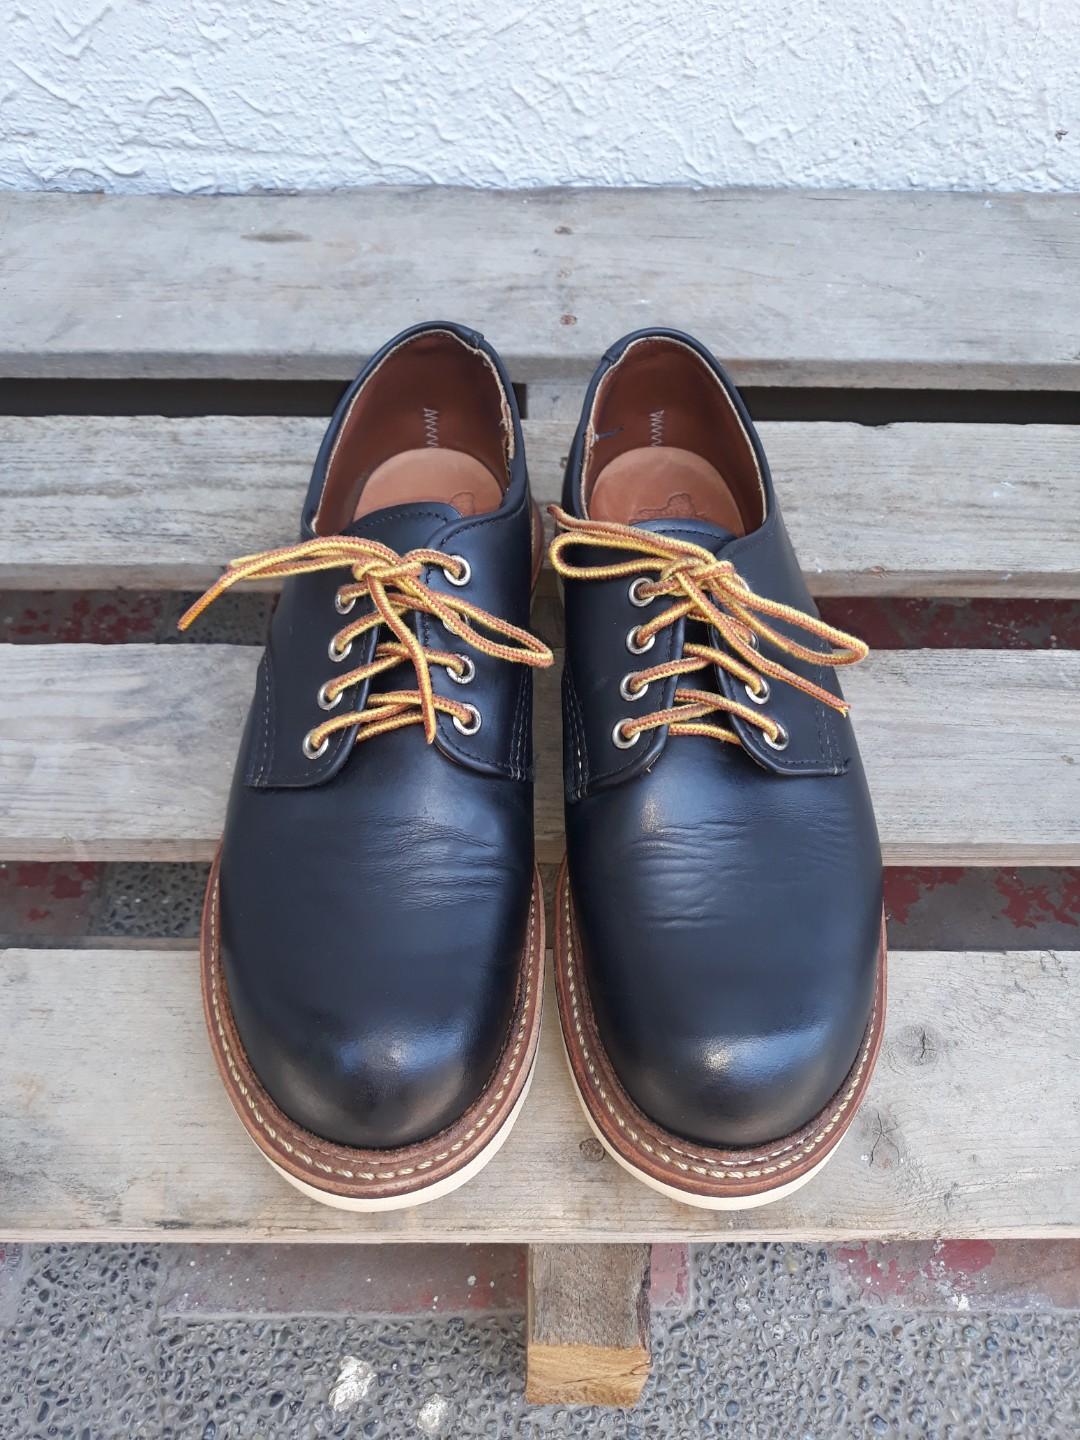 Red Wing 8002 Oxford Black Chrome, Men's Fashion, Footwear, Dress Shoes ...